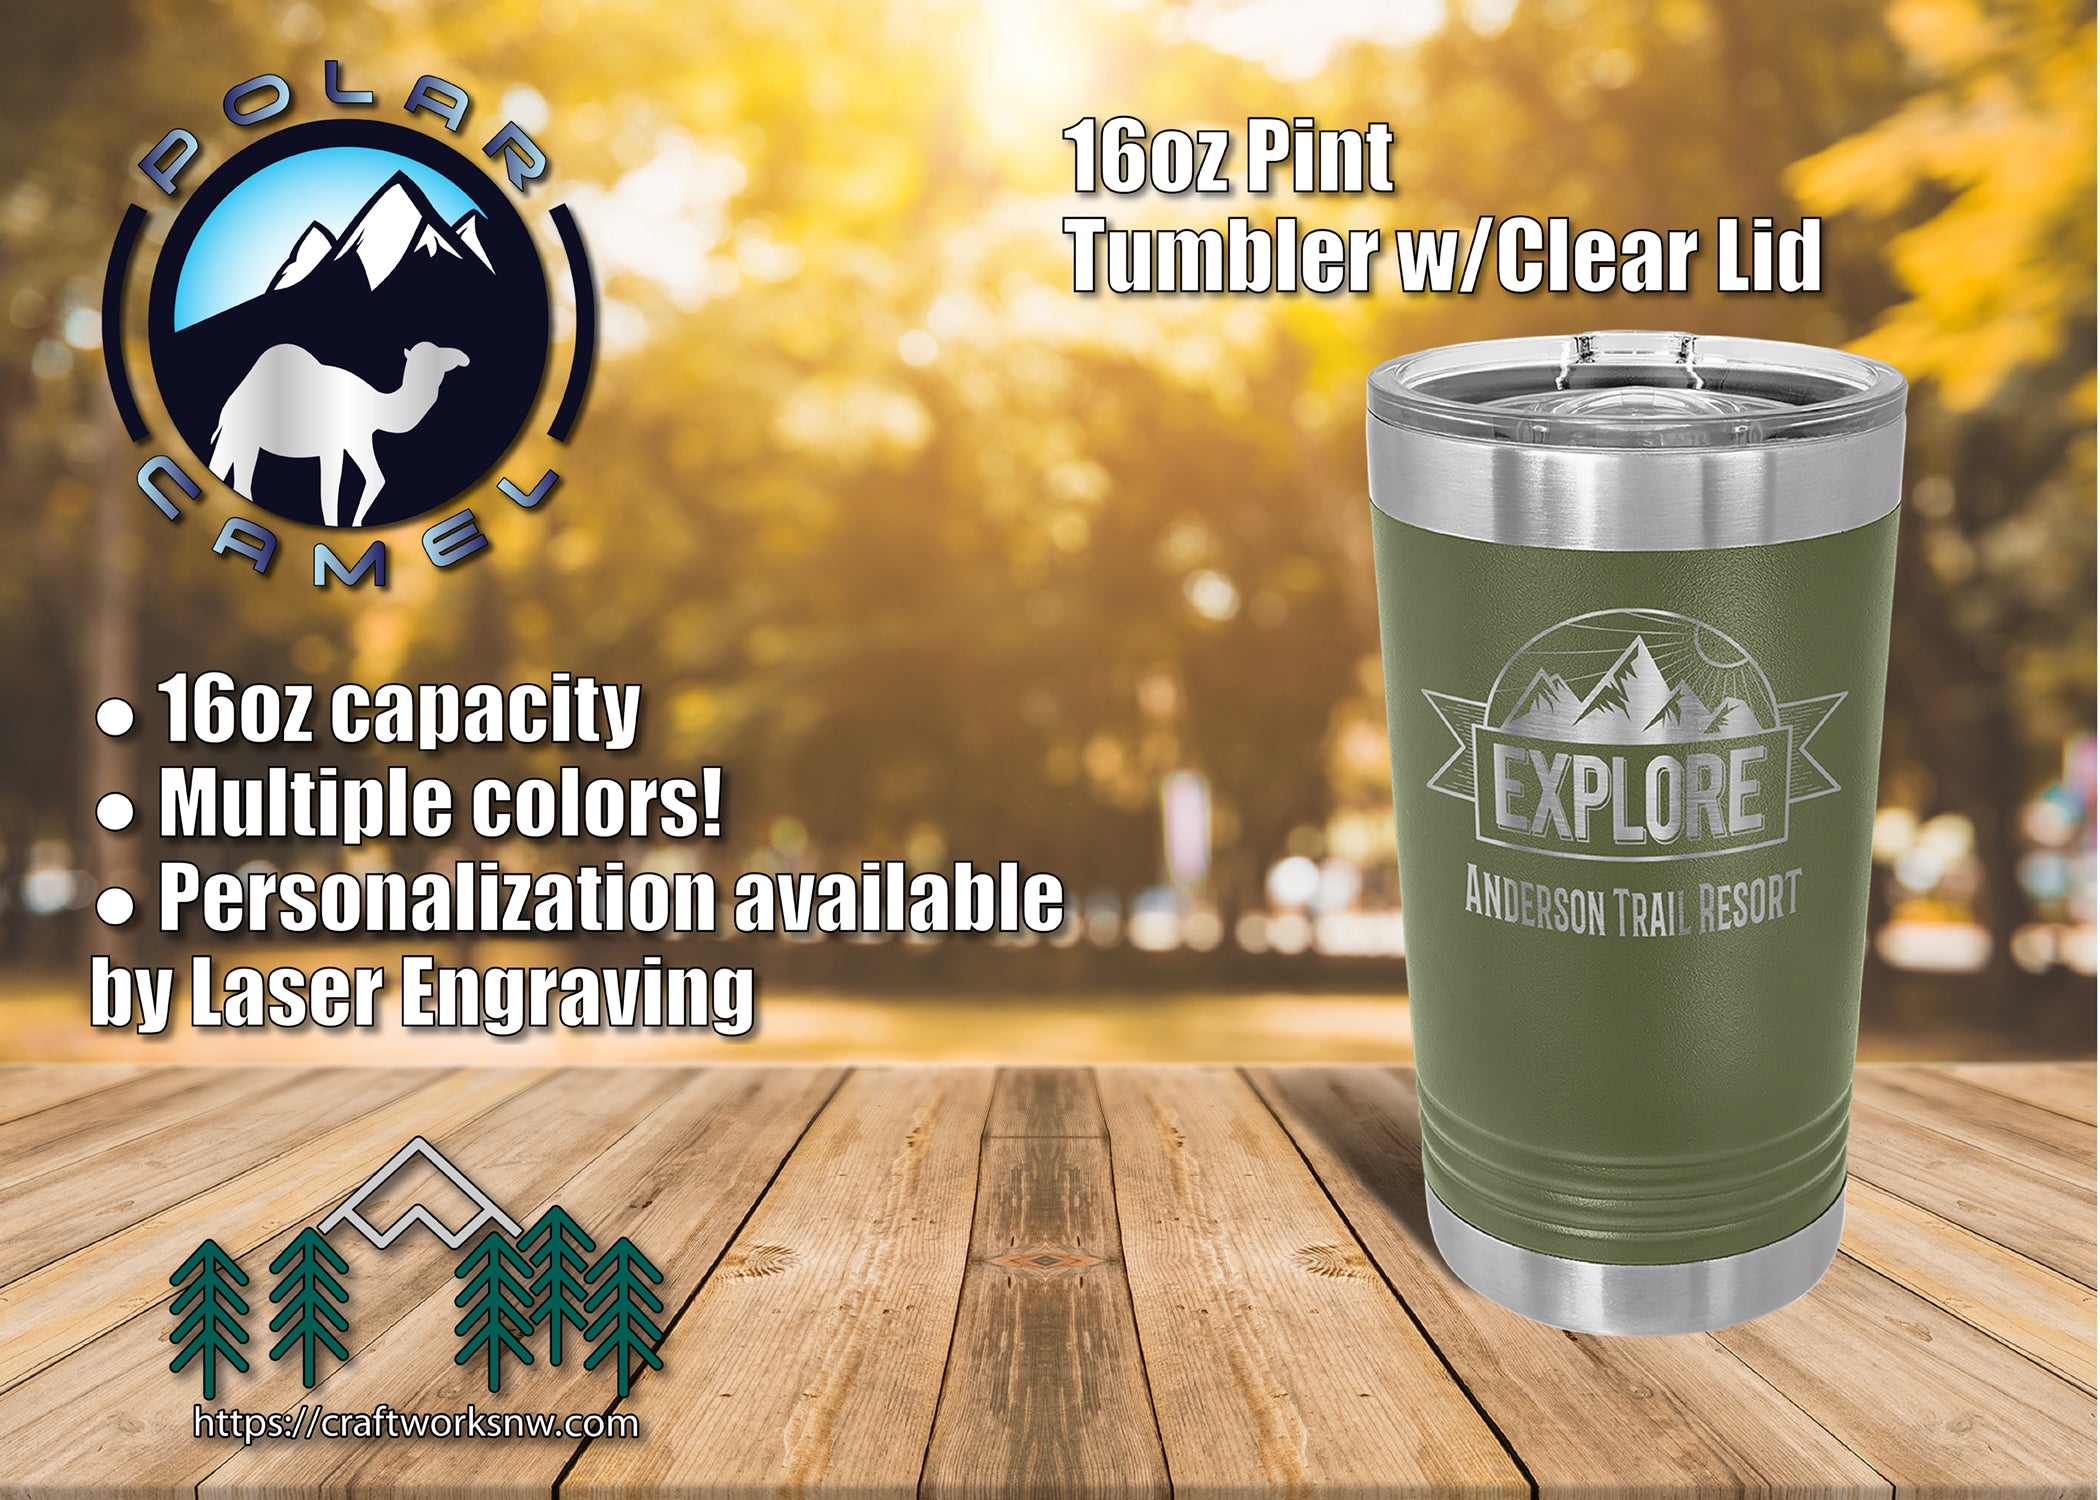 Replacement Lid for Polar Camel 12, 14 and 16 oz Tumblers